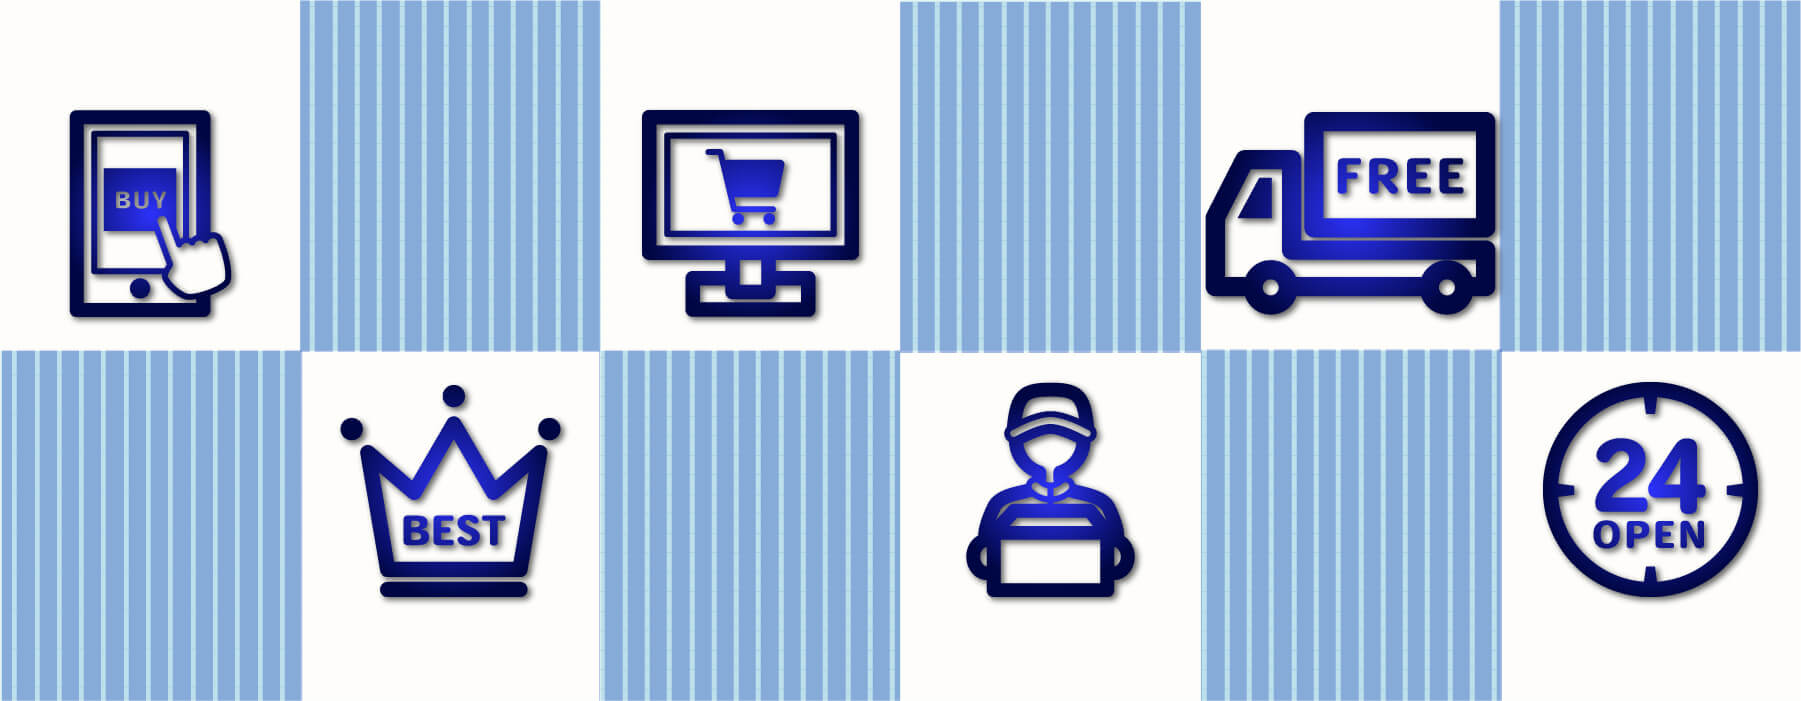 e-commerce feature icons